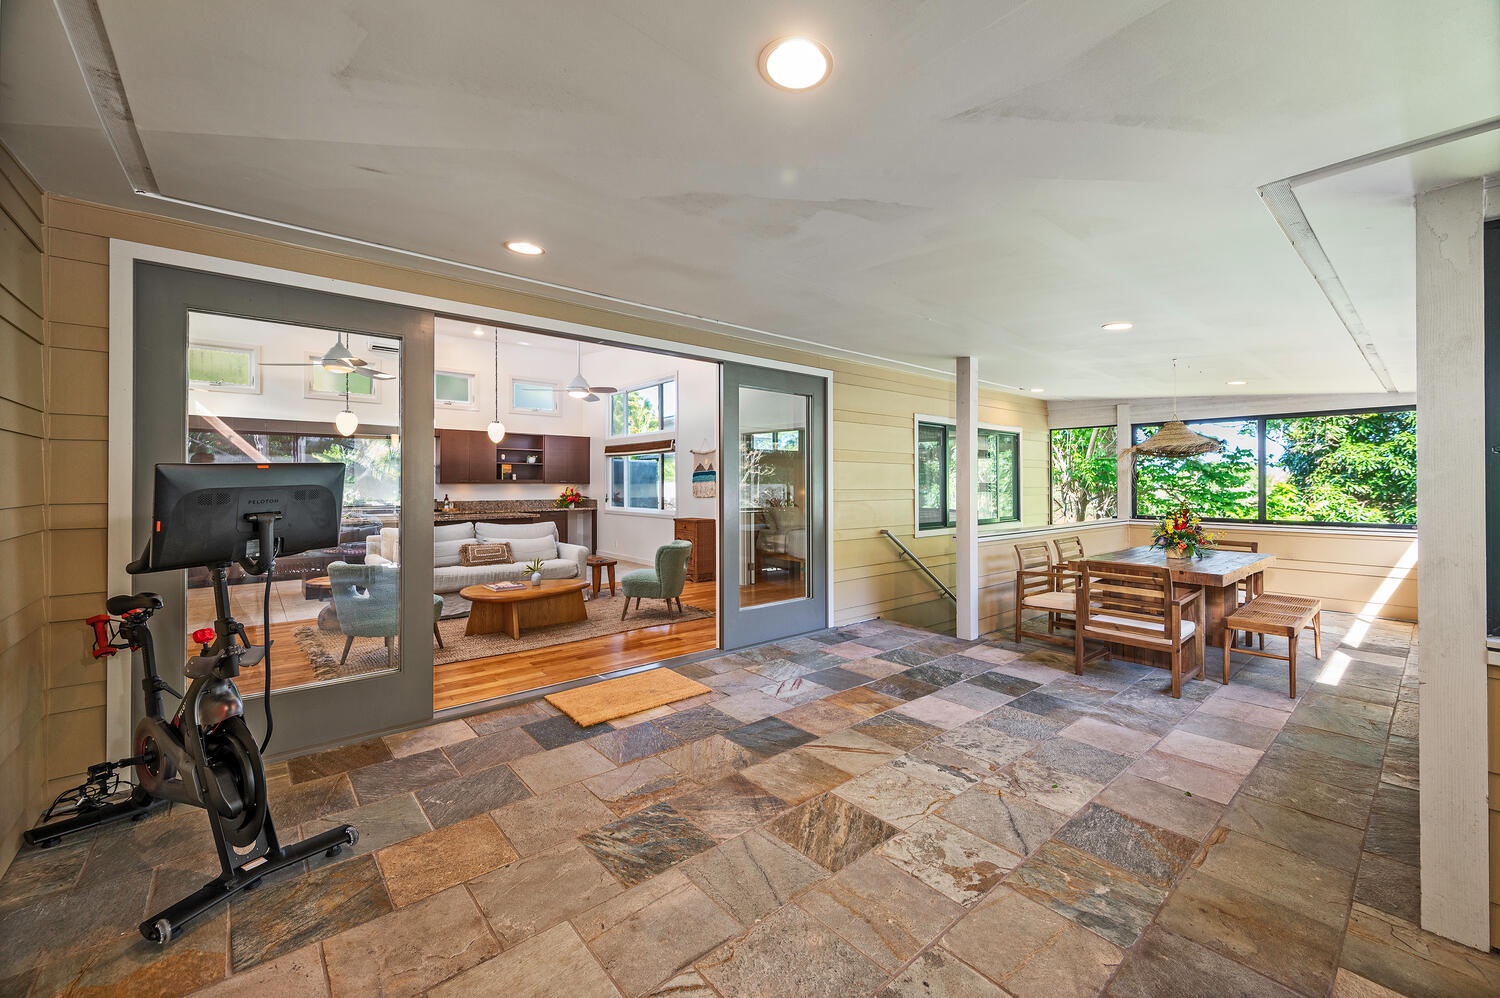 Kailua Vacation Rentals, Hale Honi La - Large indoor/outdoor dining and lounge area complete with a Peloton!